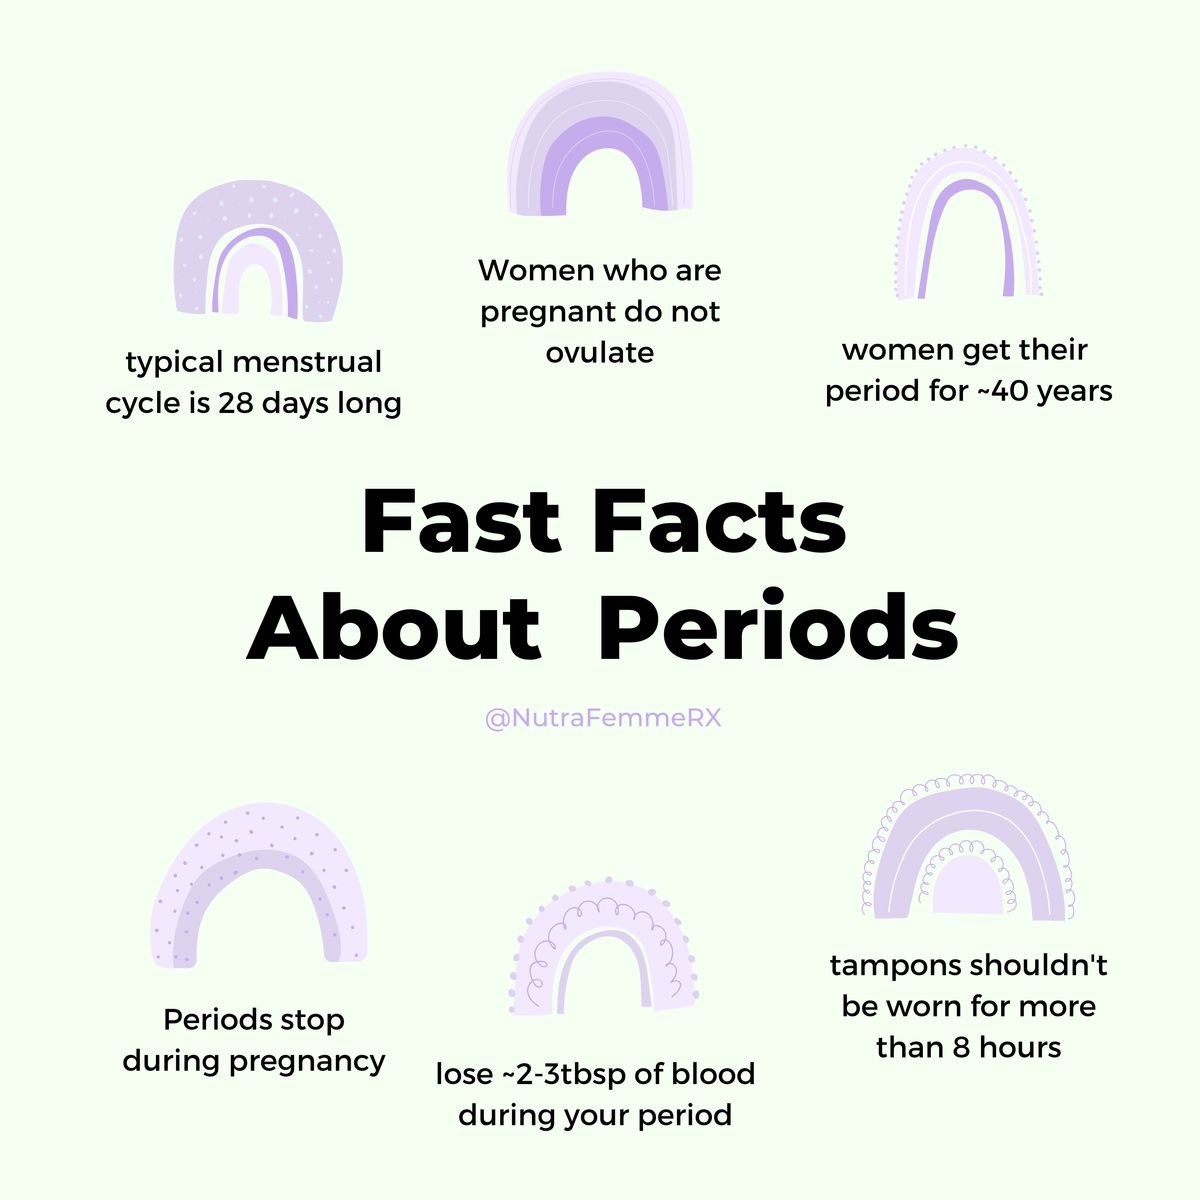 Some facts about your periods!
#justflowwithit #periods #menstrualawareness